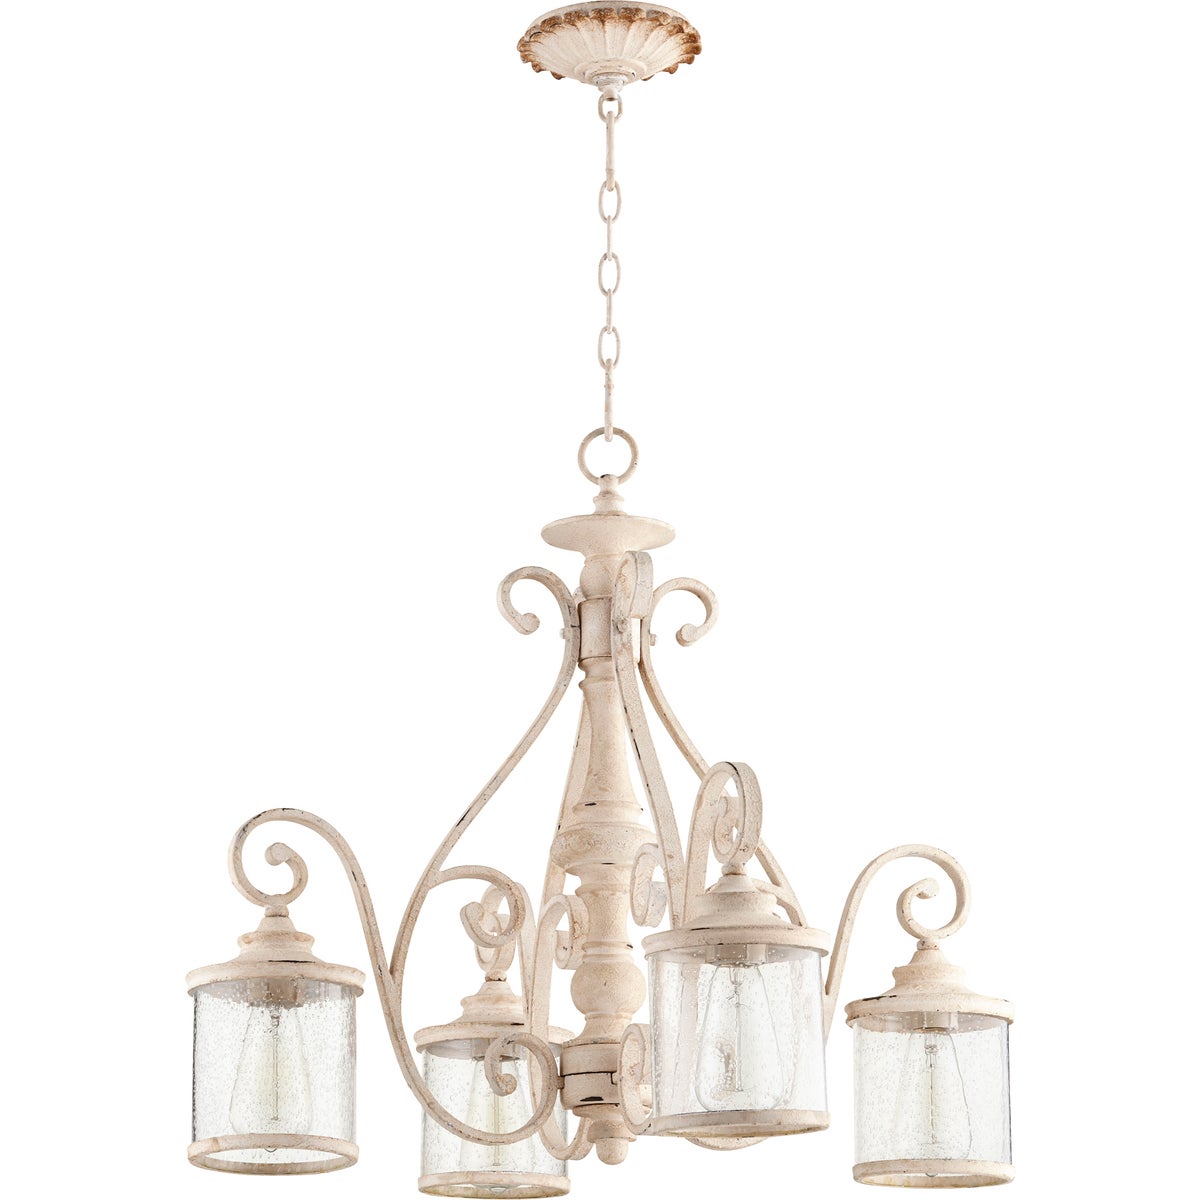 San Miguel 4 Light Traditional Persian White Chandelier